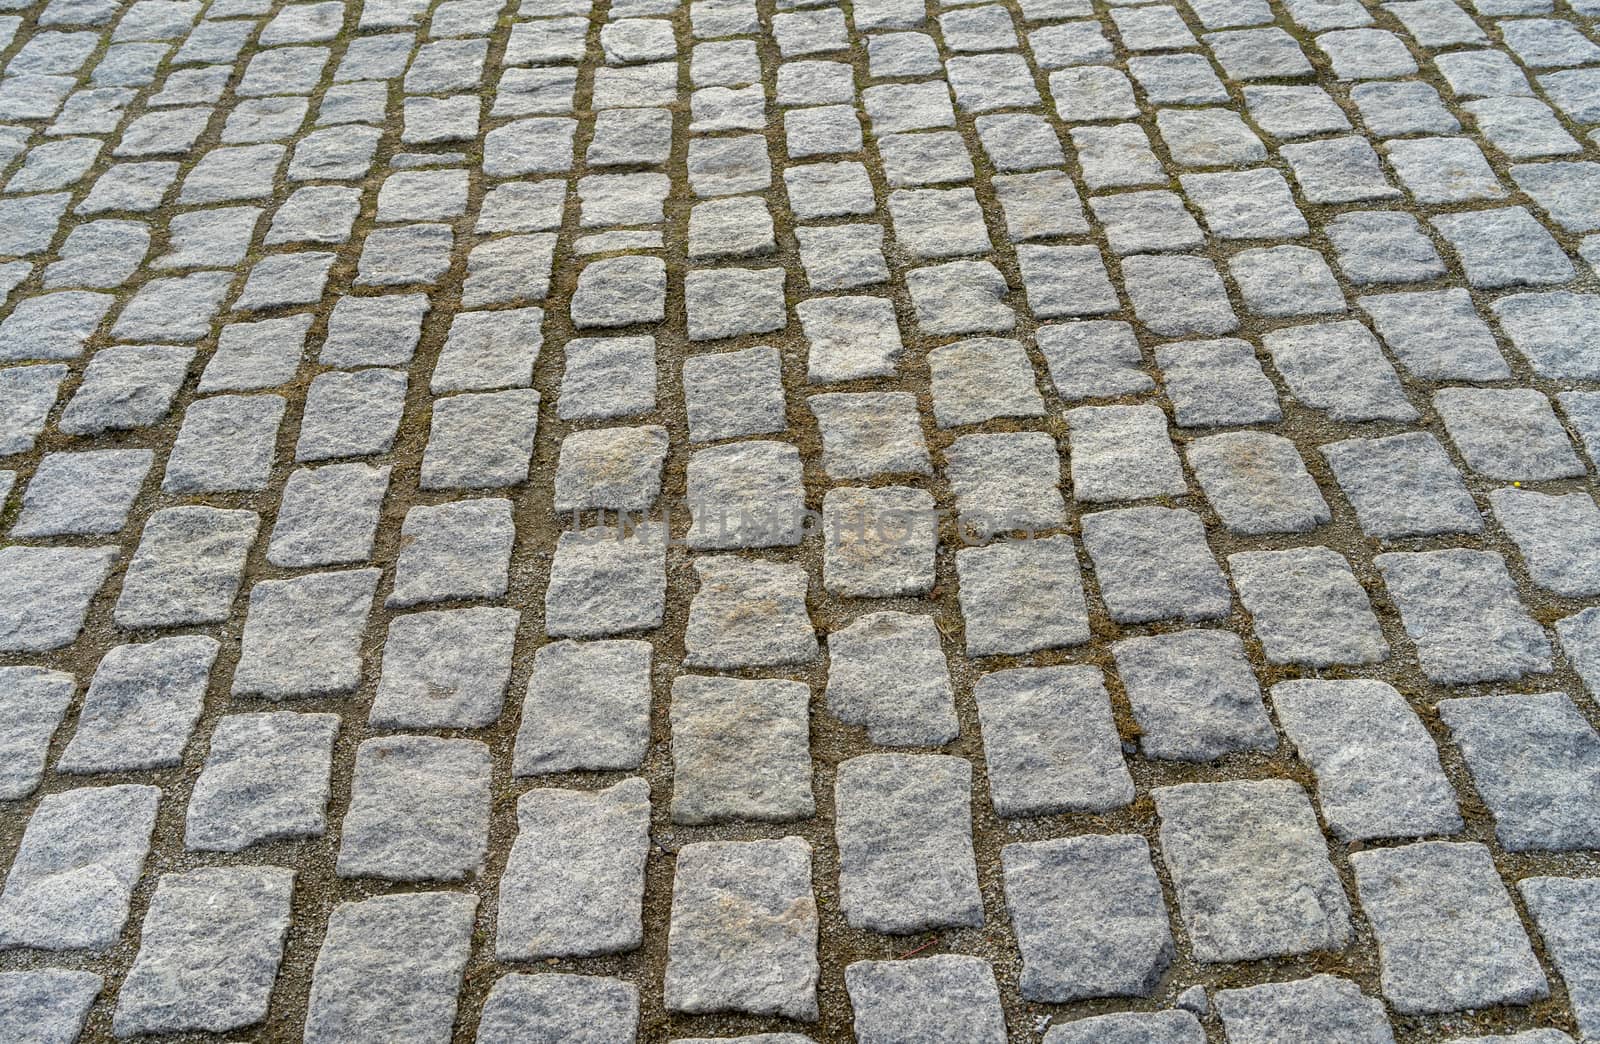 Paving stones of the old square by fifg